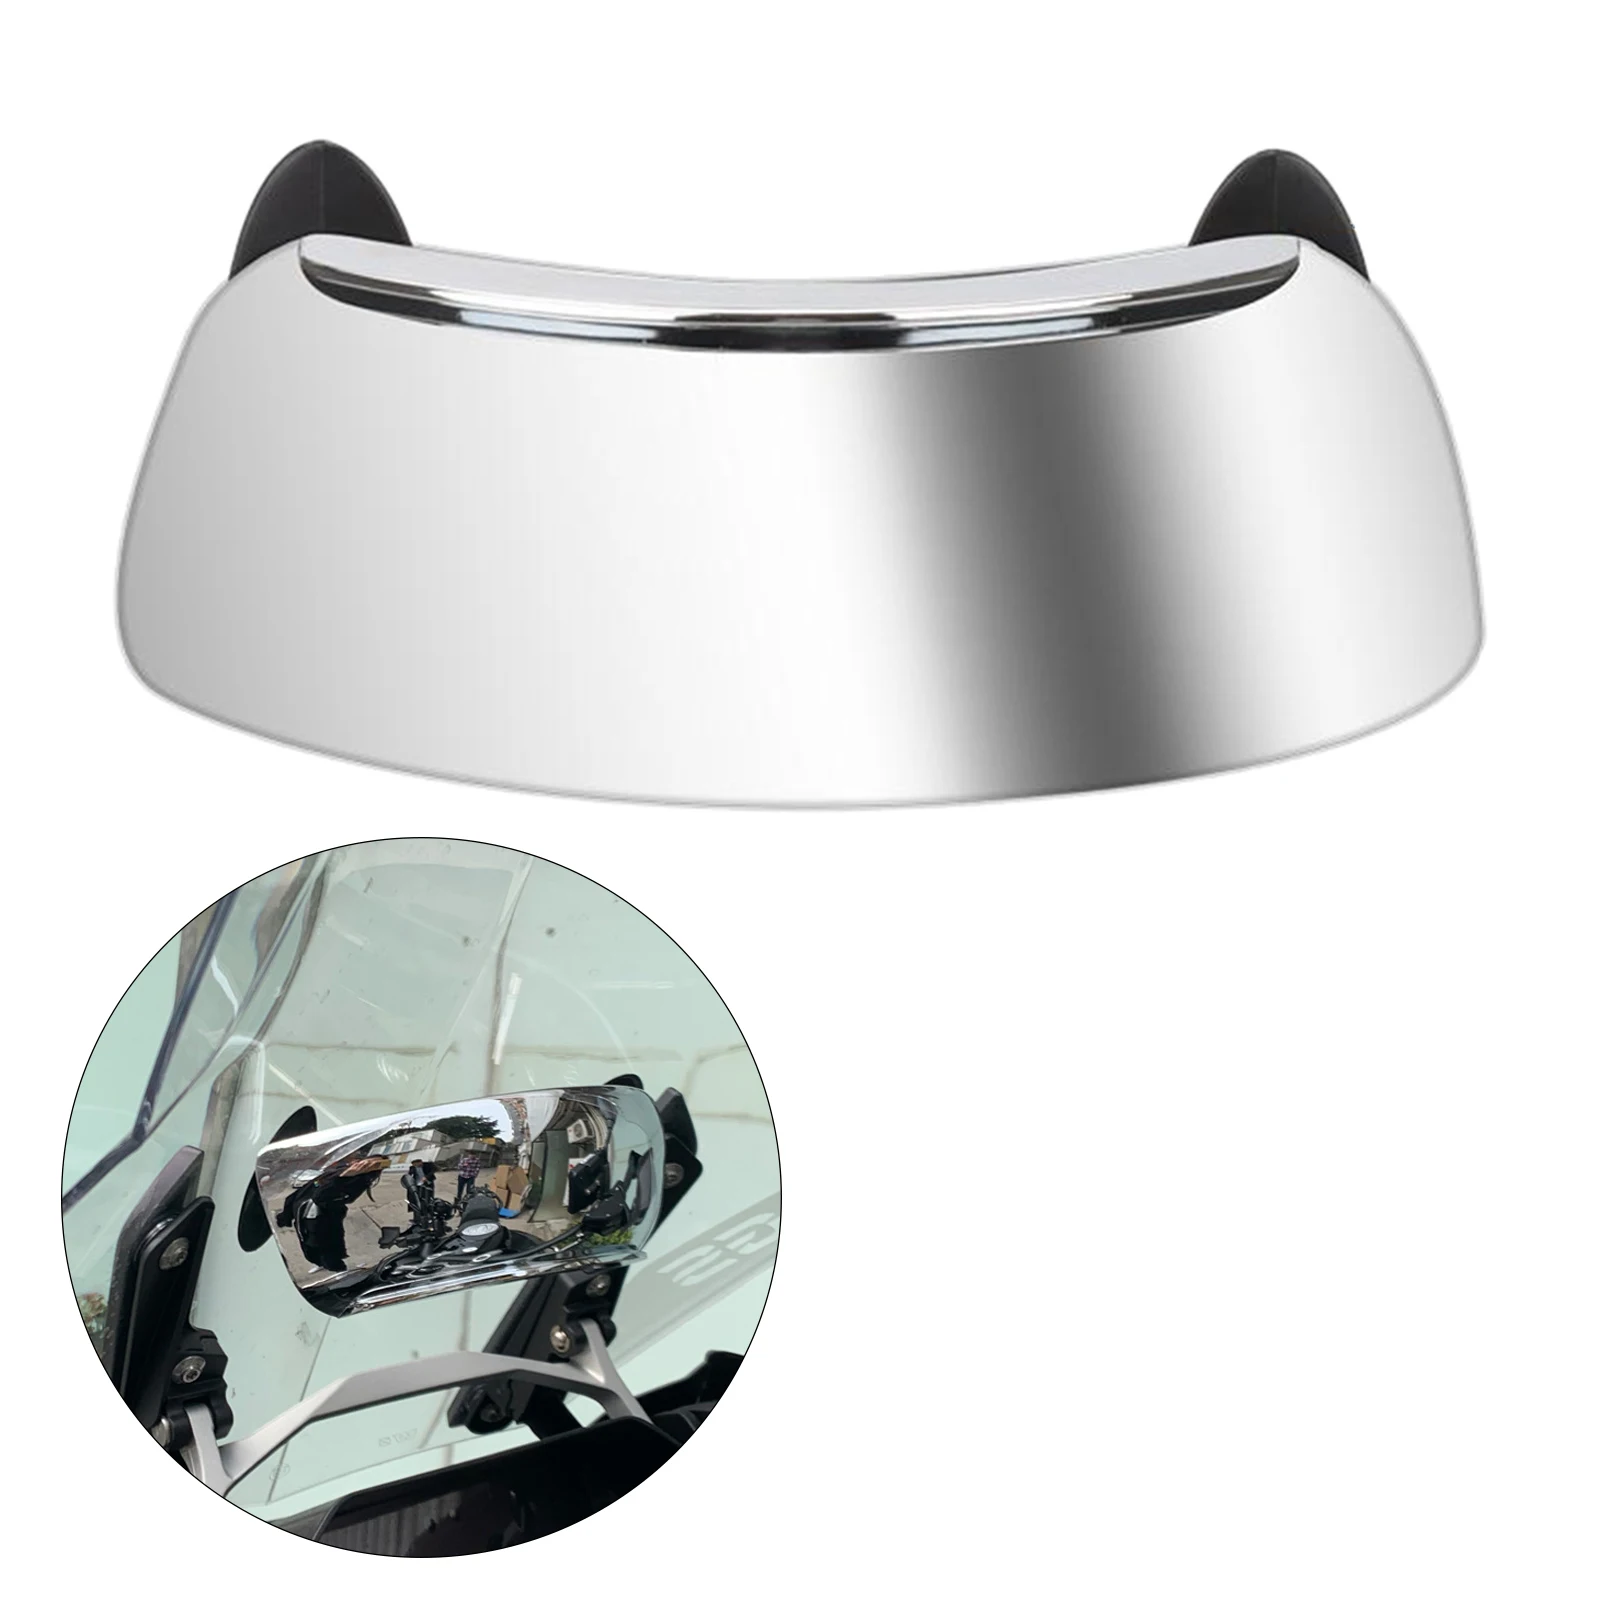 Motorcycle 180 Degree Full-view mirror Rear View Mirror Blind Spot Mirrors for ATV/UTV, Scooters, Cars, Aircrafts, Boats